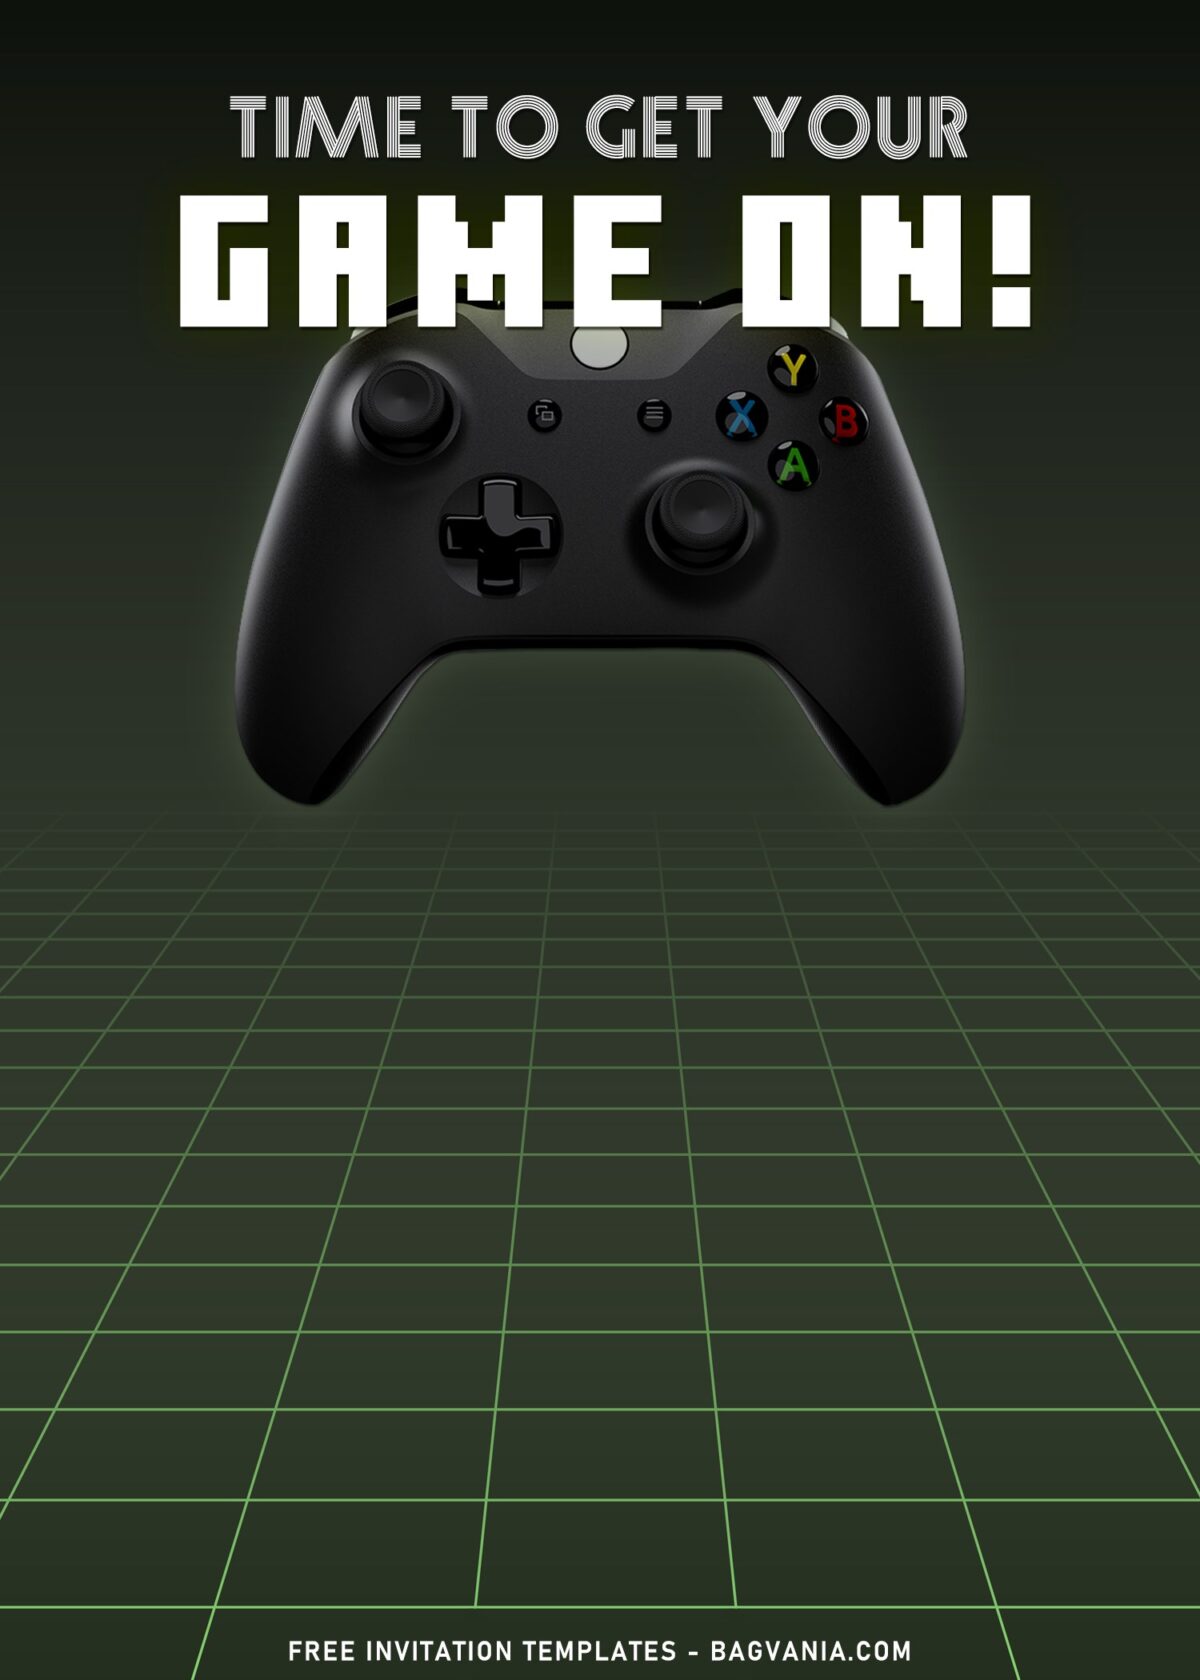 11+ Video Game Birthday Invitation Templates For Your Gamer's Birthday with Xbox controller